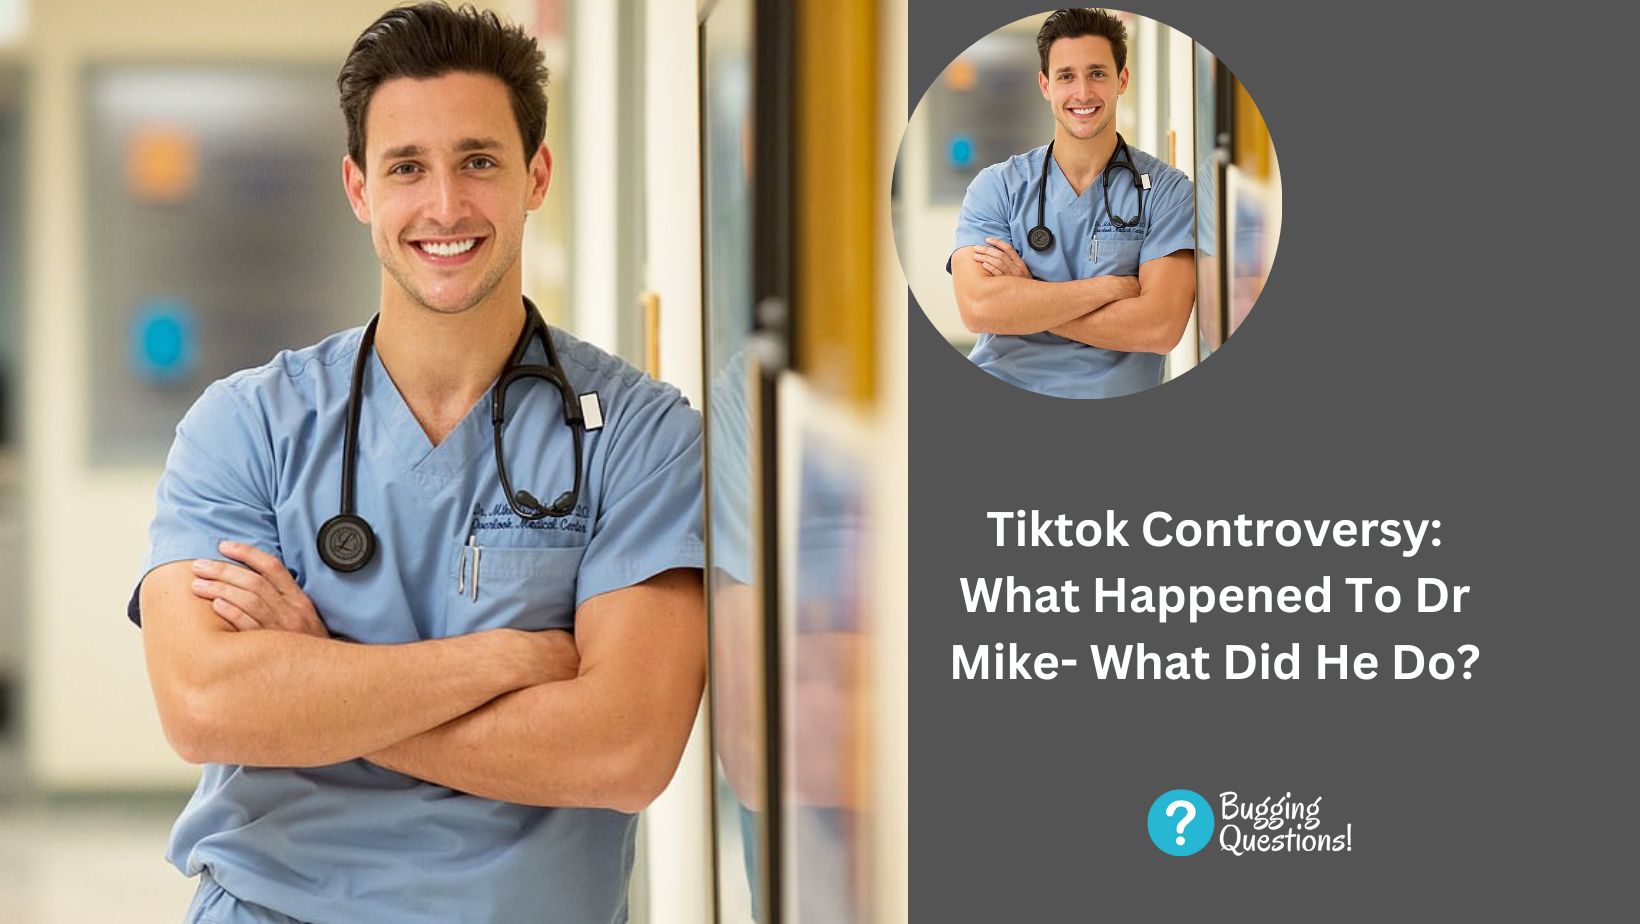 Tiktok Controversy: What Happened To Dr Mike- What Did He Do?